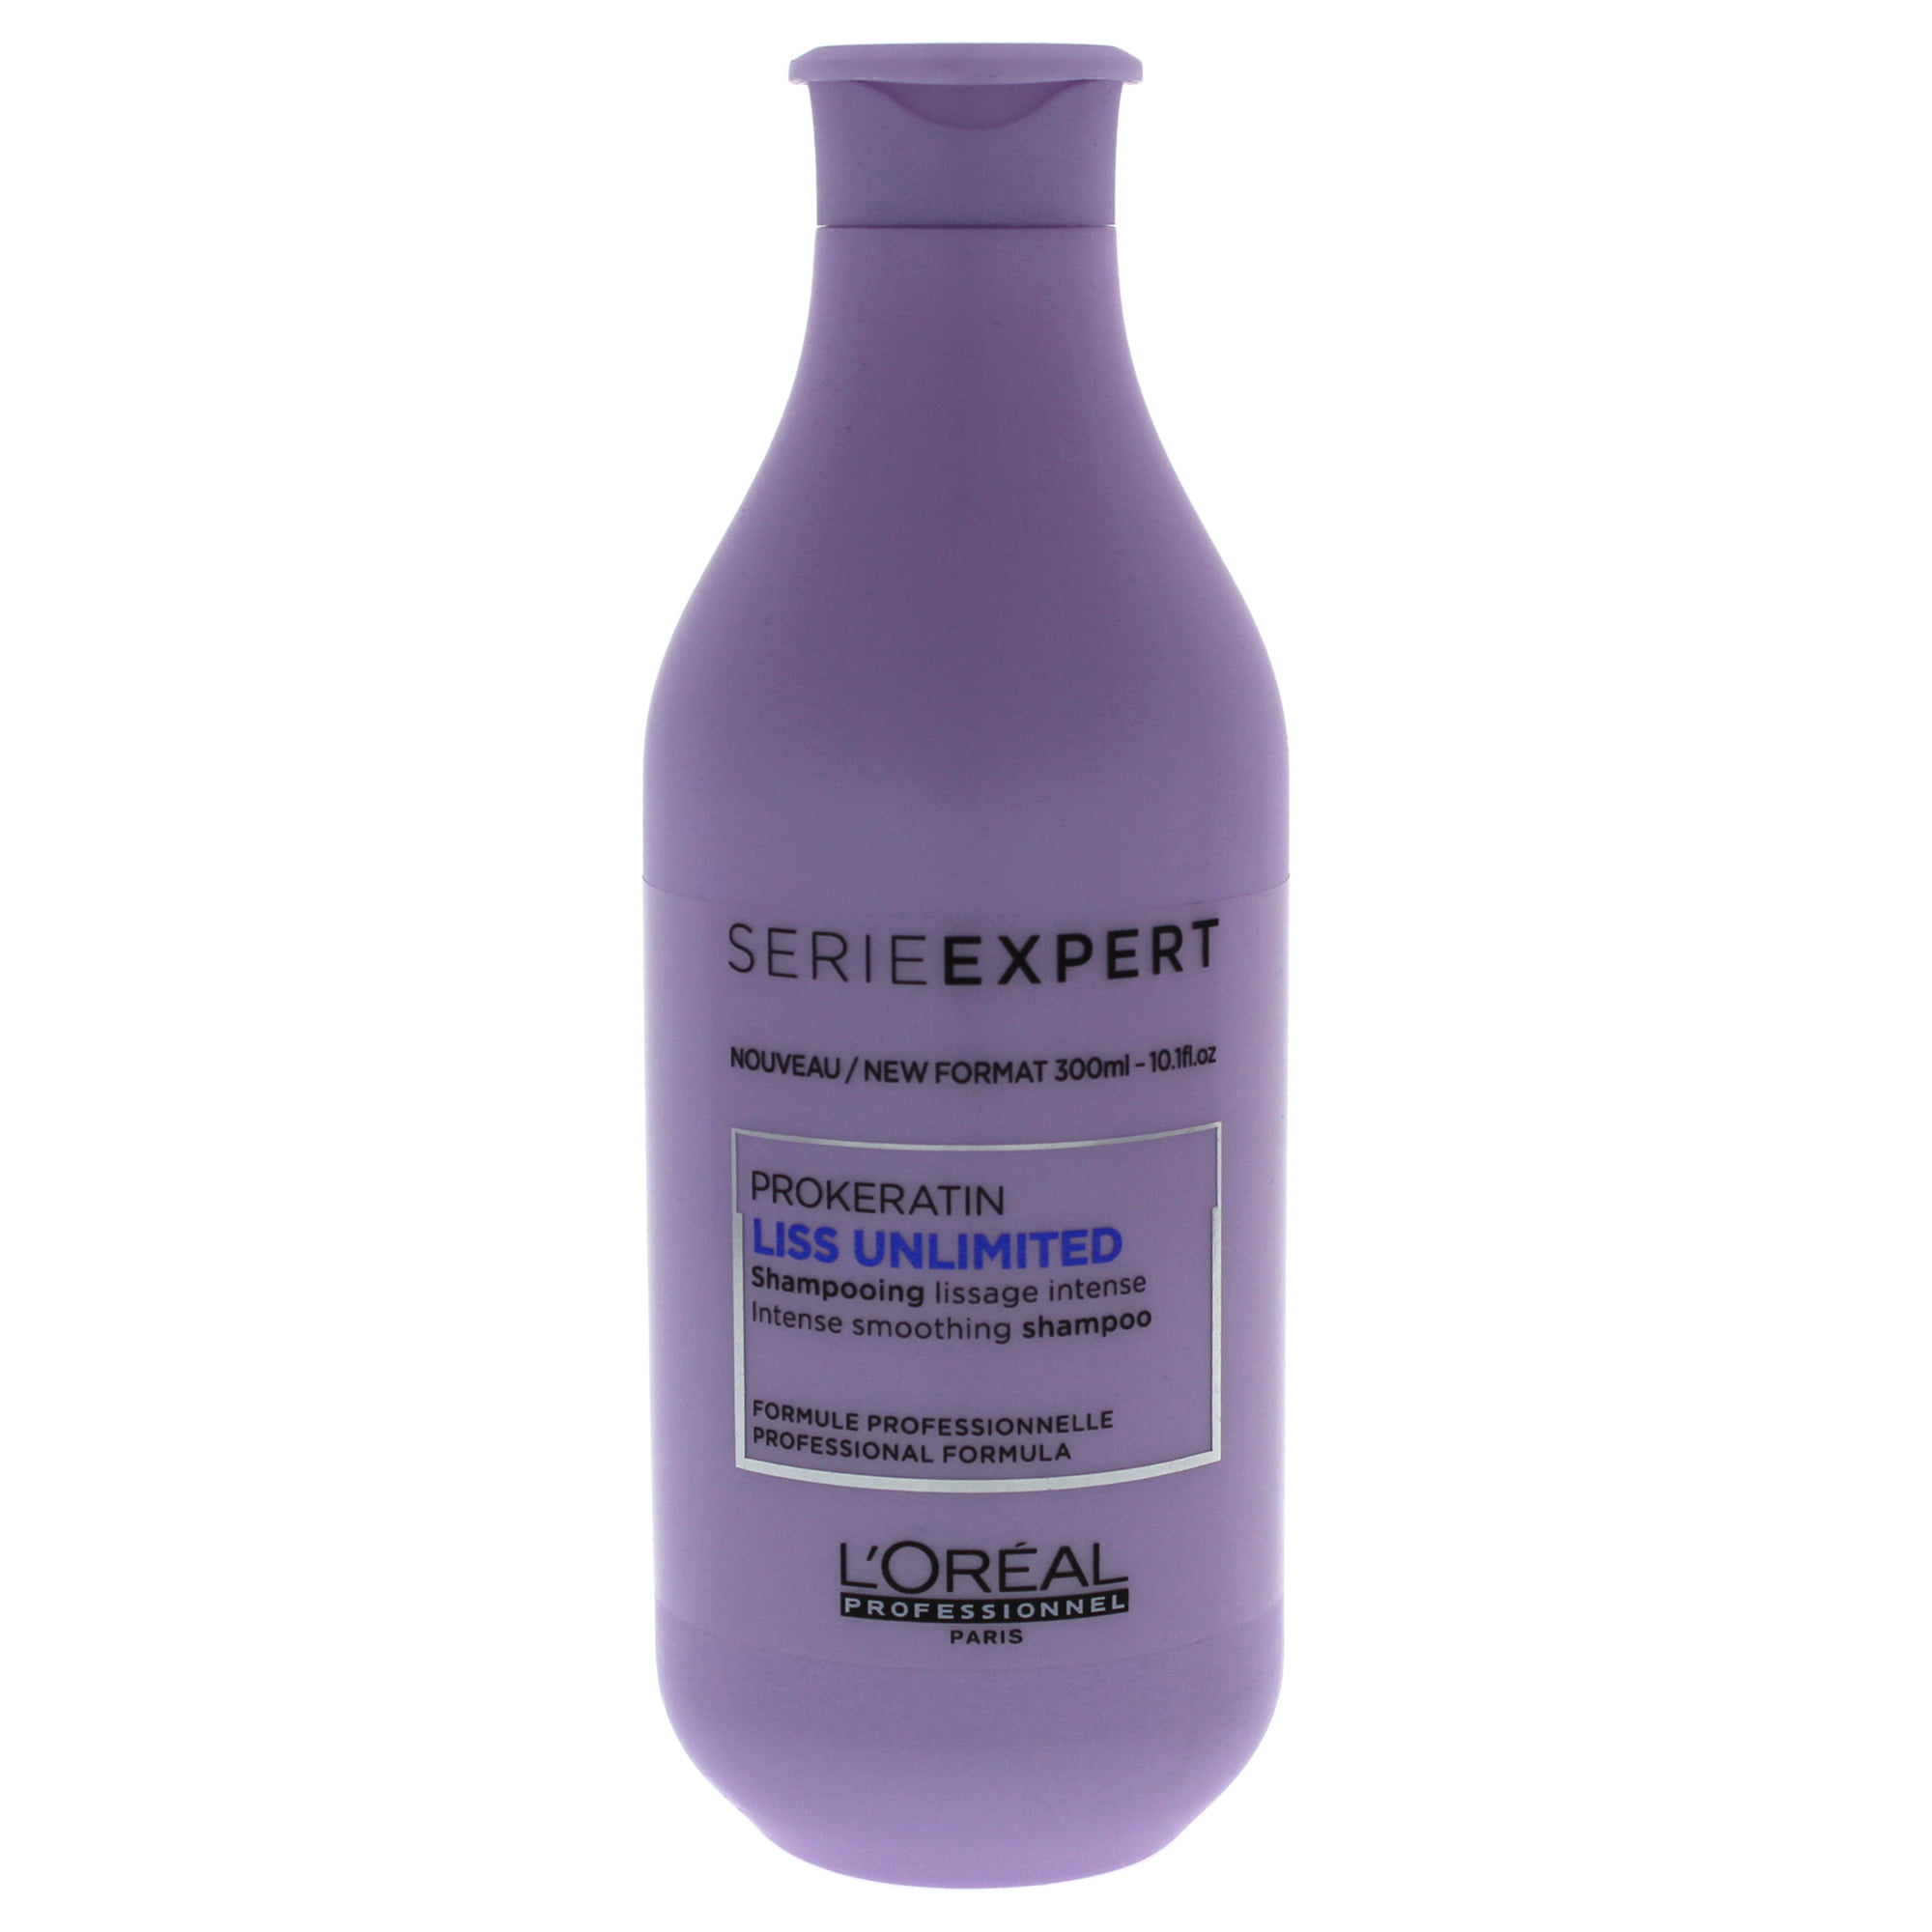 Шампунь serie. Loreal professional Expert шампунь. Шампунь лореаль Liss ultime. Loreal Prokeratin Liss Unlimited serie Expert. L'Oreal Professionnel serie Expert Liss Unlimited.